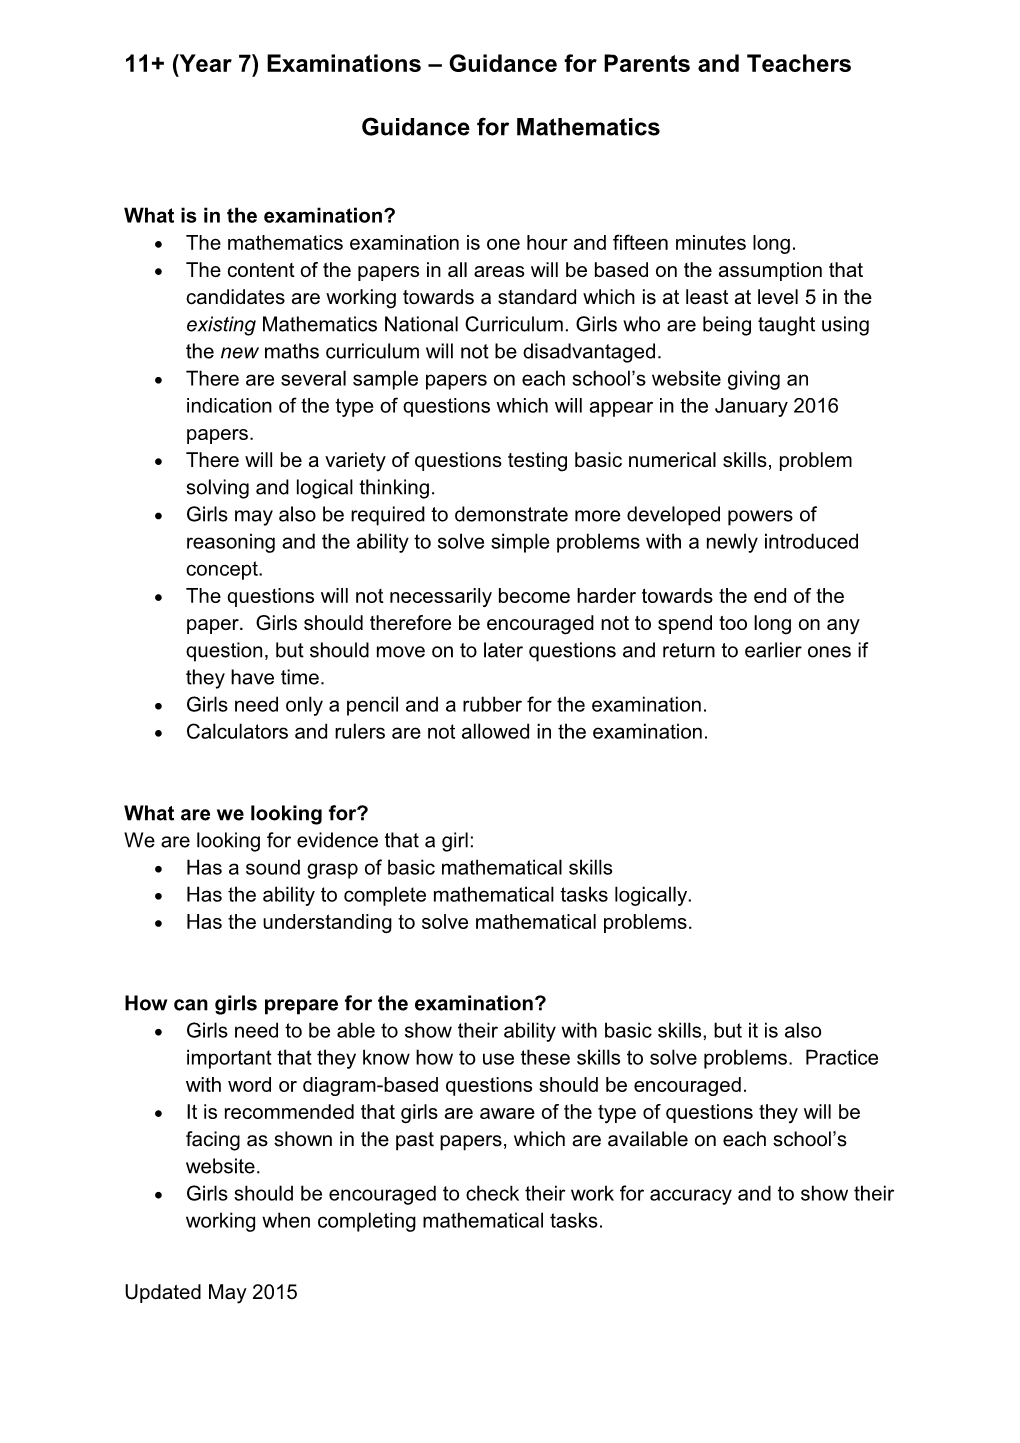 11+ (Year 7) Examinations Guidance for Parents and Teachers